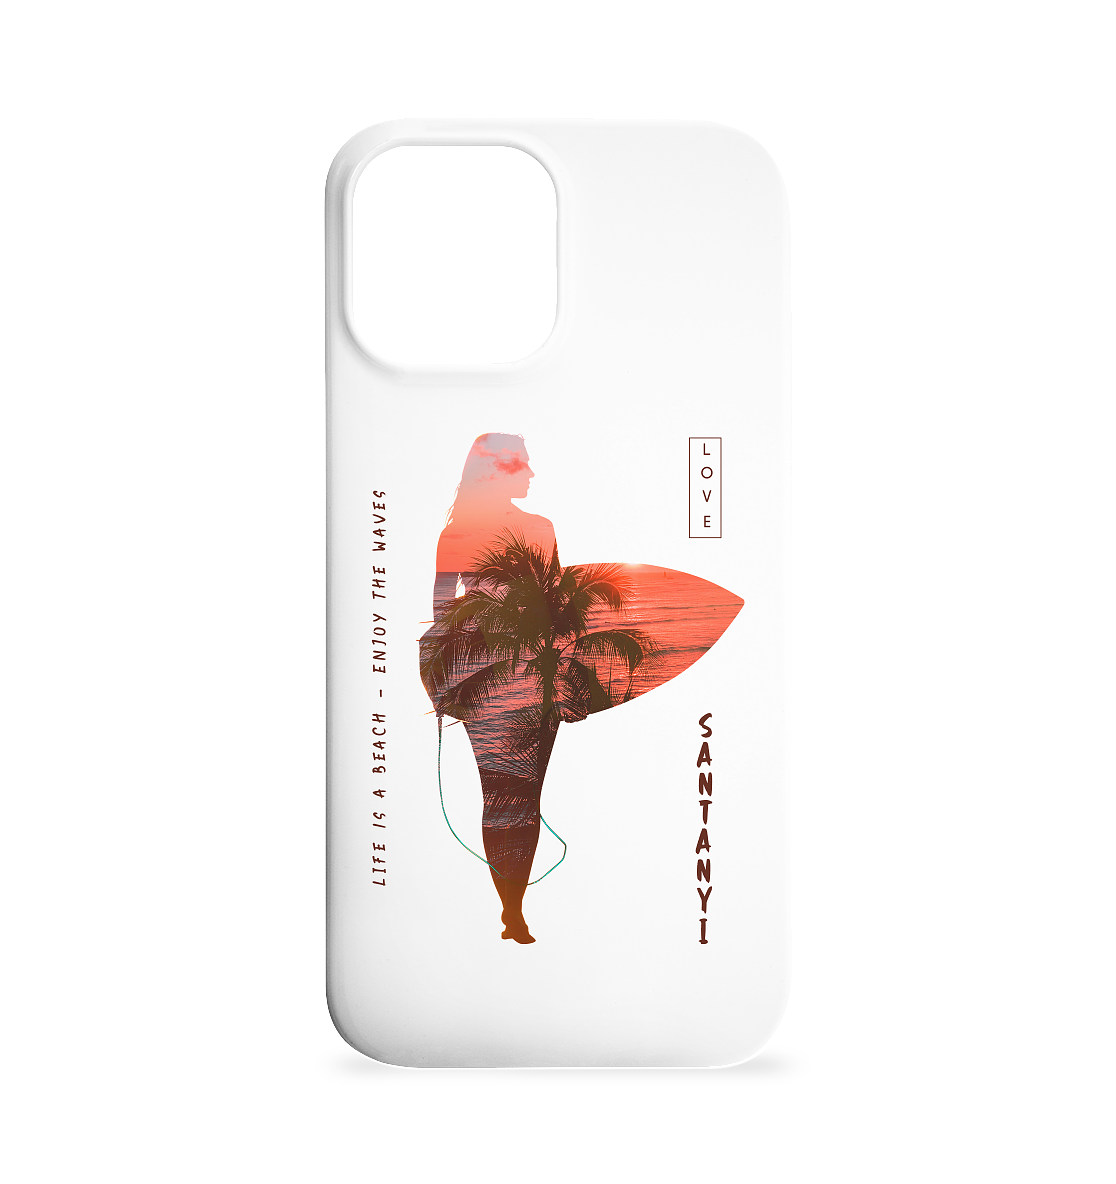 Life is a beach - Enjoy the waves • Iphone 12 Max Handyhülle • Personalisierbar!